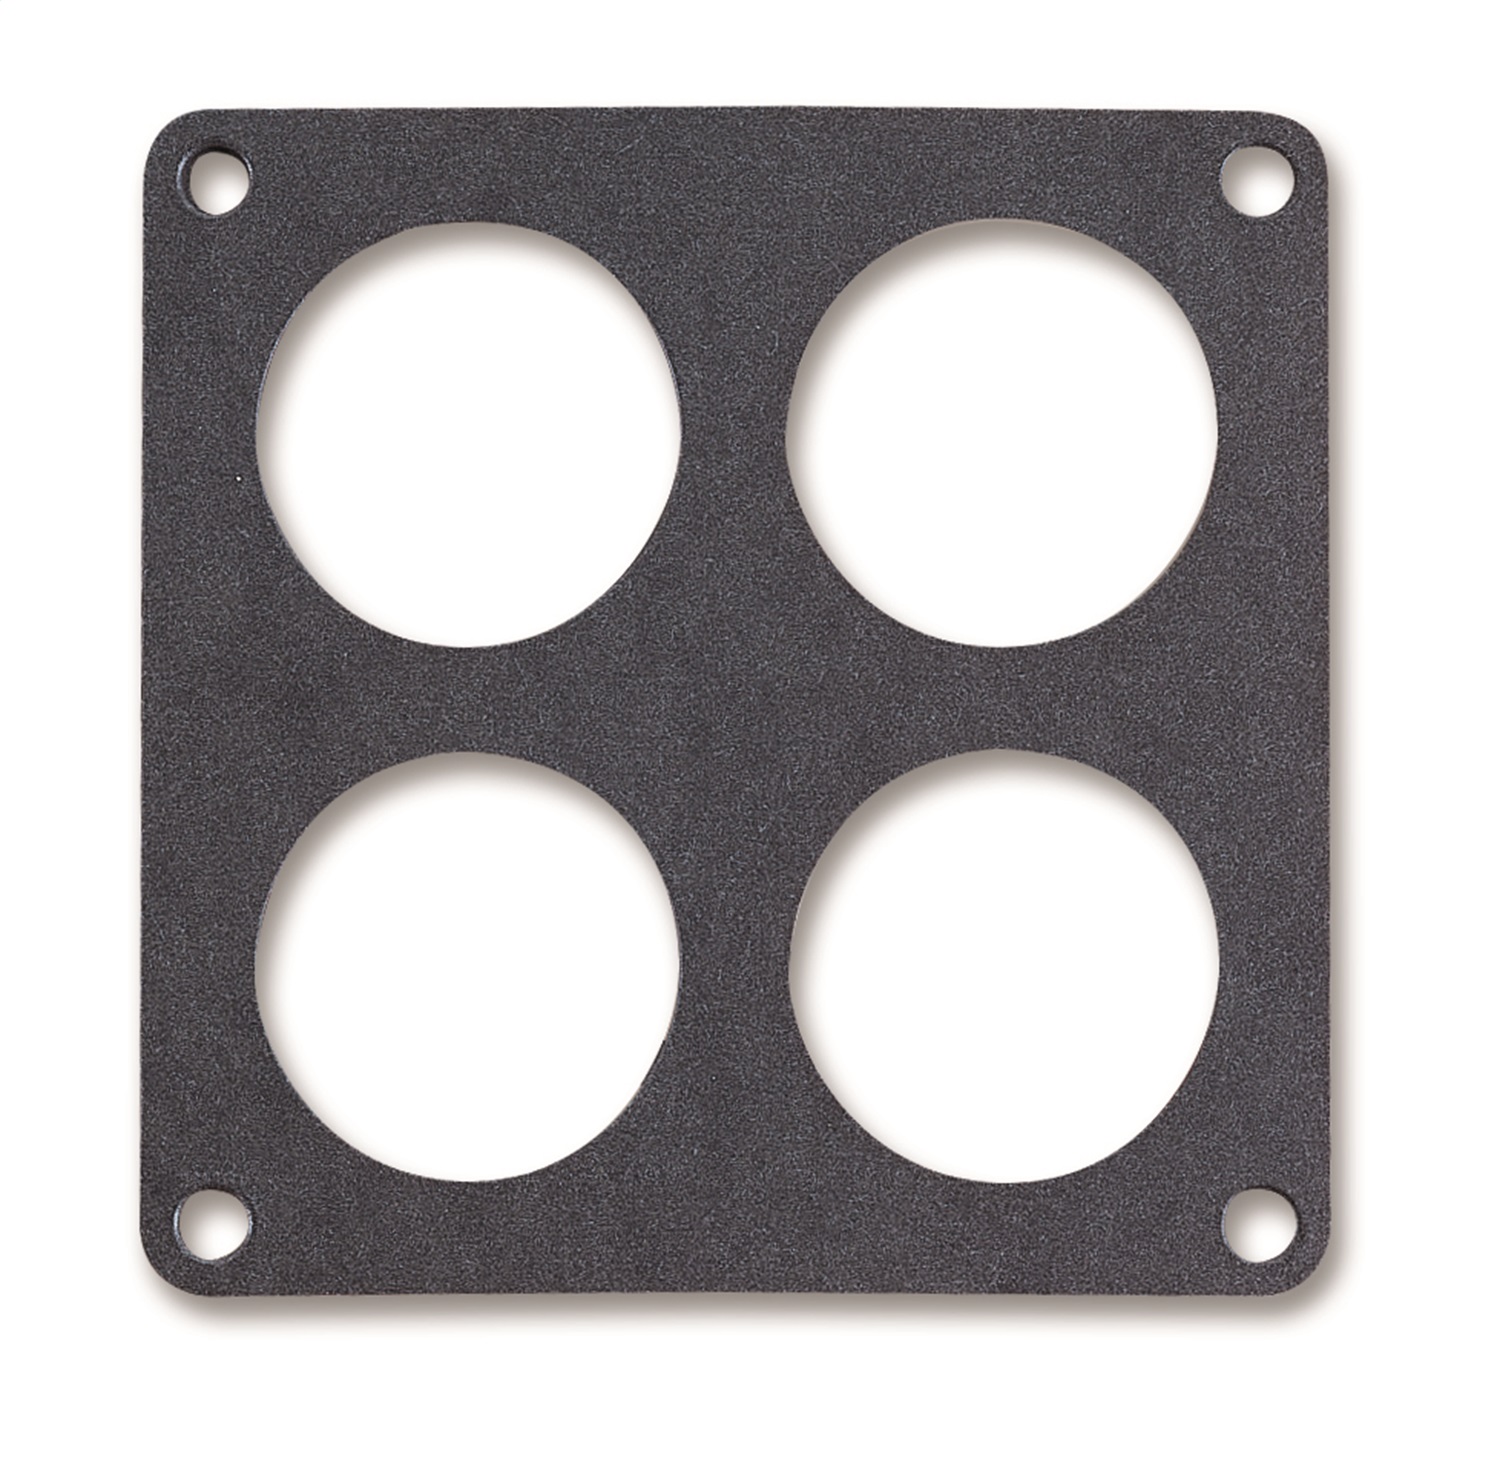 Holley Performance Holley Performance 108-99 Base Gasket